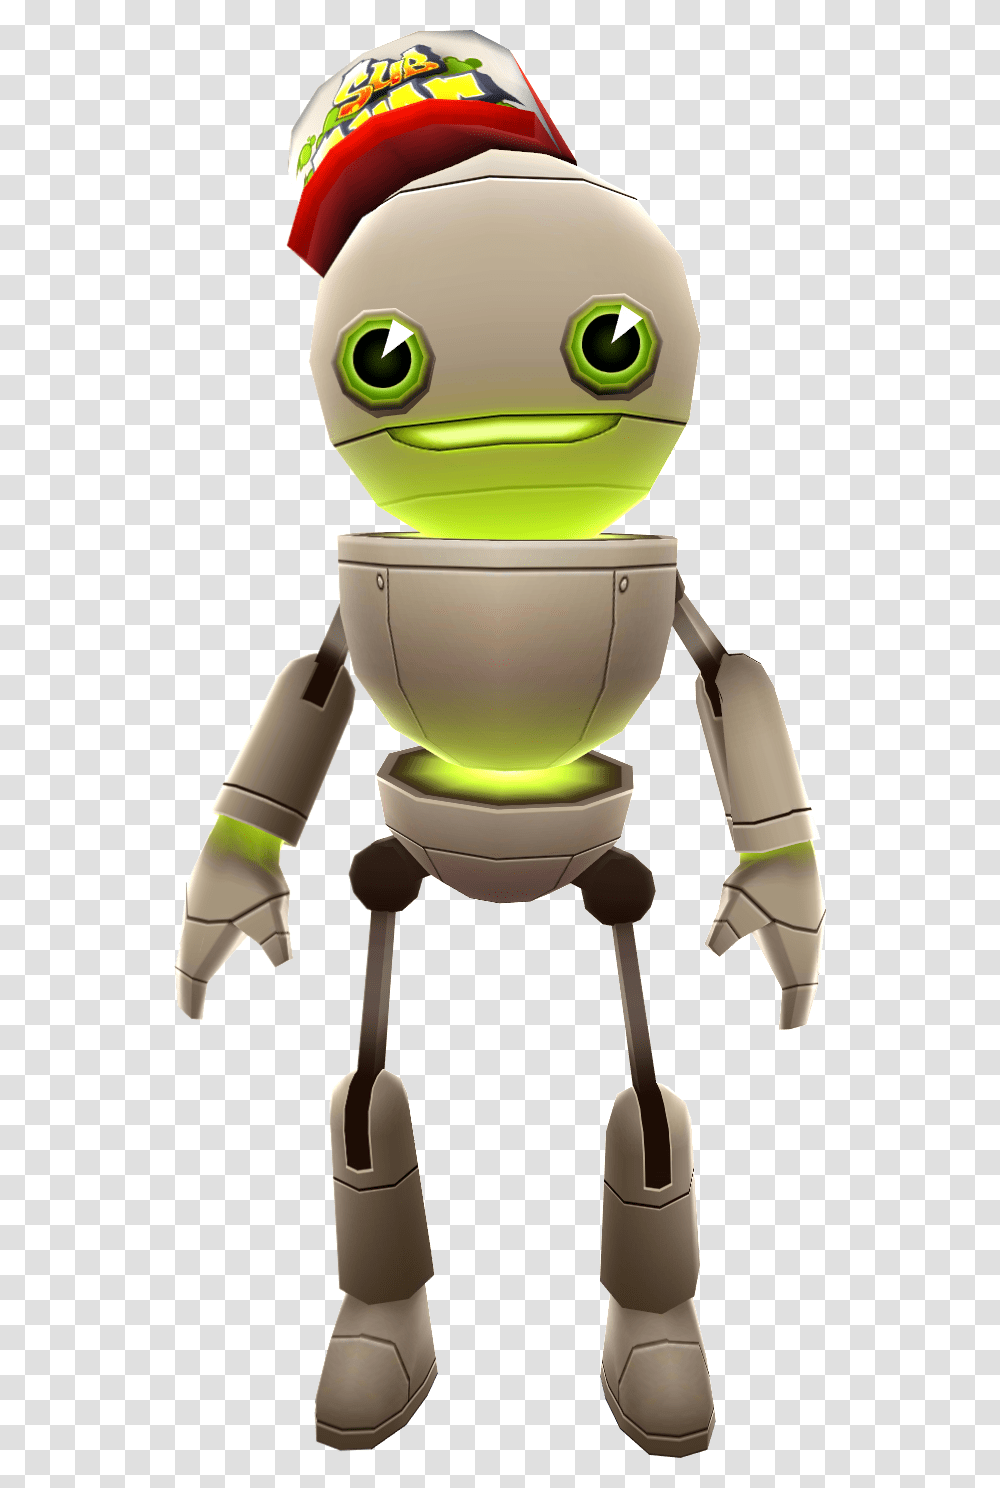 Tagbot Subway Surfers Subway Surfers Tagbot Space Outfit, Robot, Toy, Appliance Transparent Png